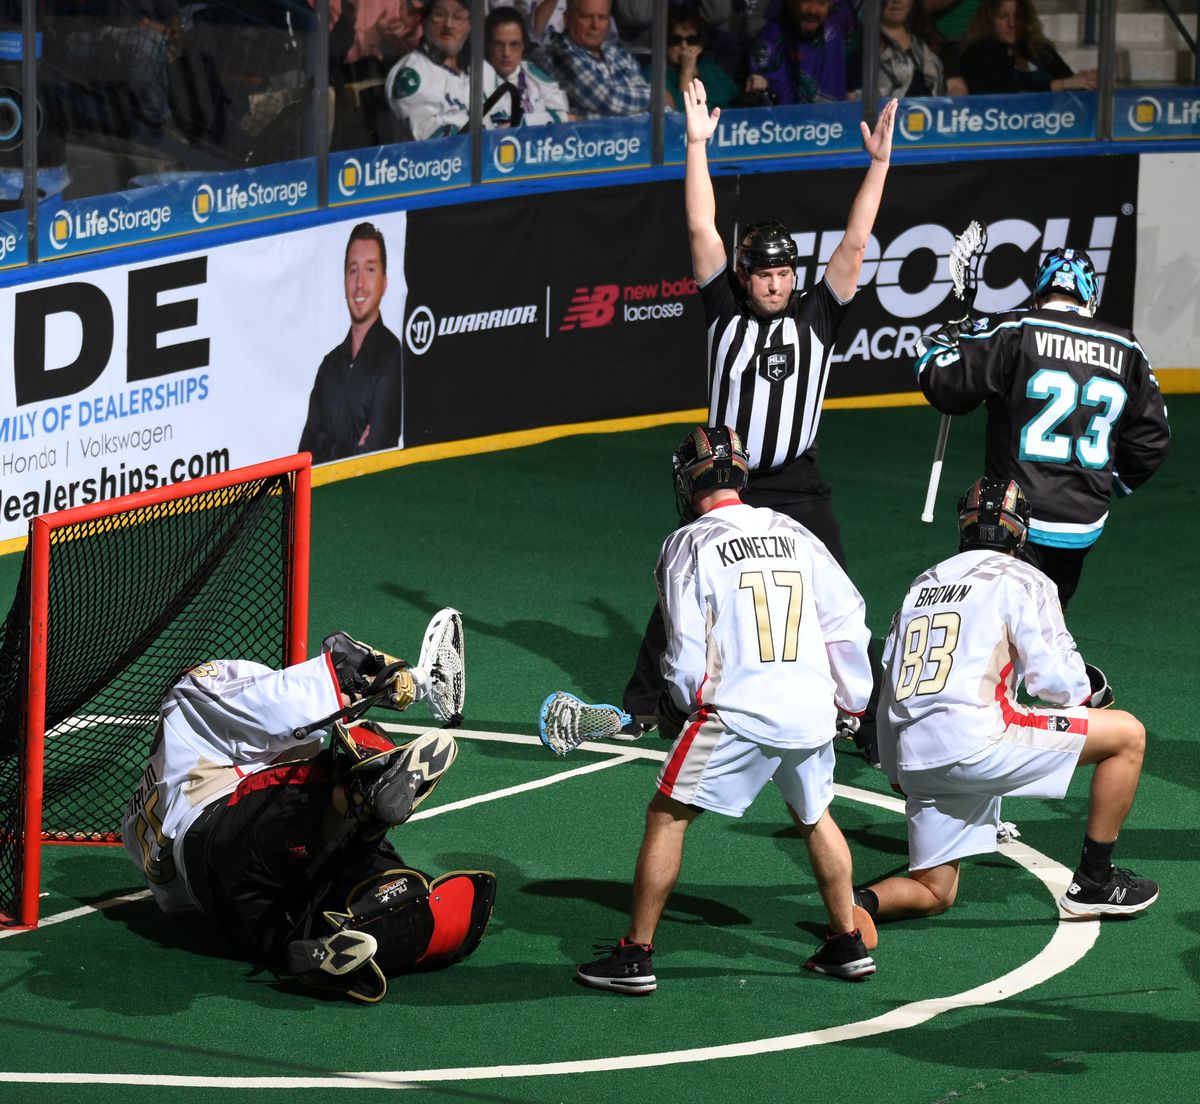 Kyle Kennery makes a call during a National Lacrosse League game.